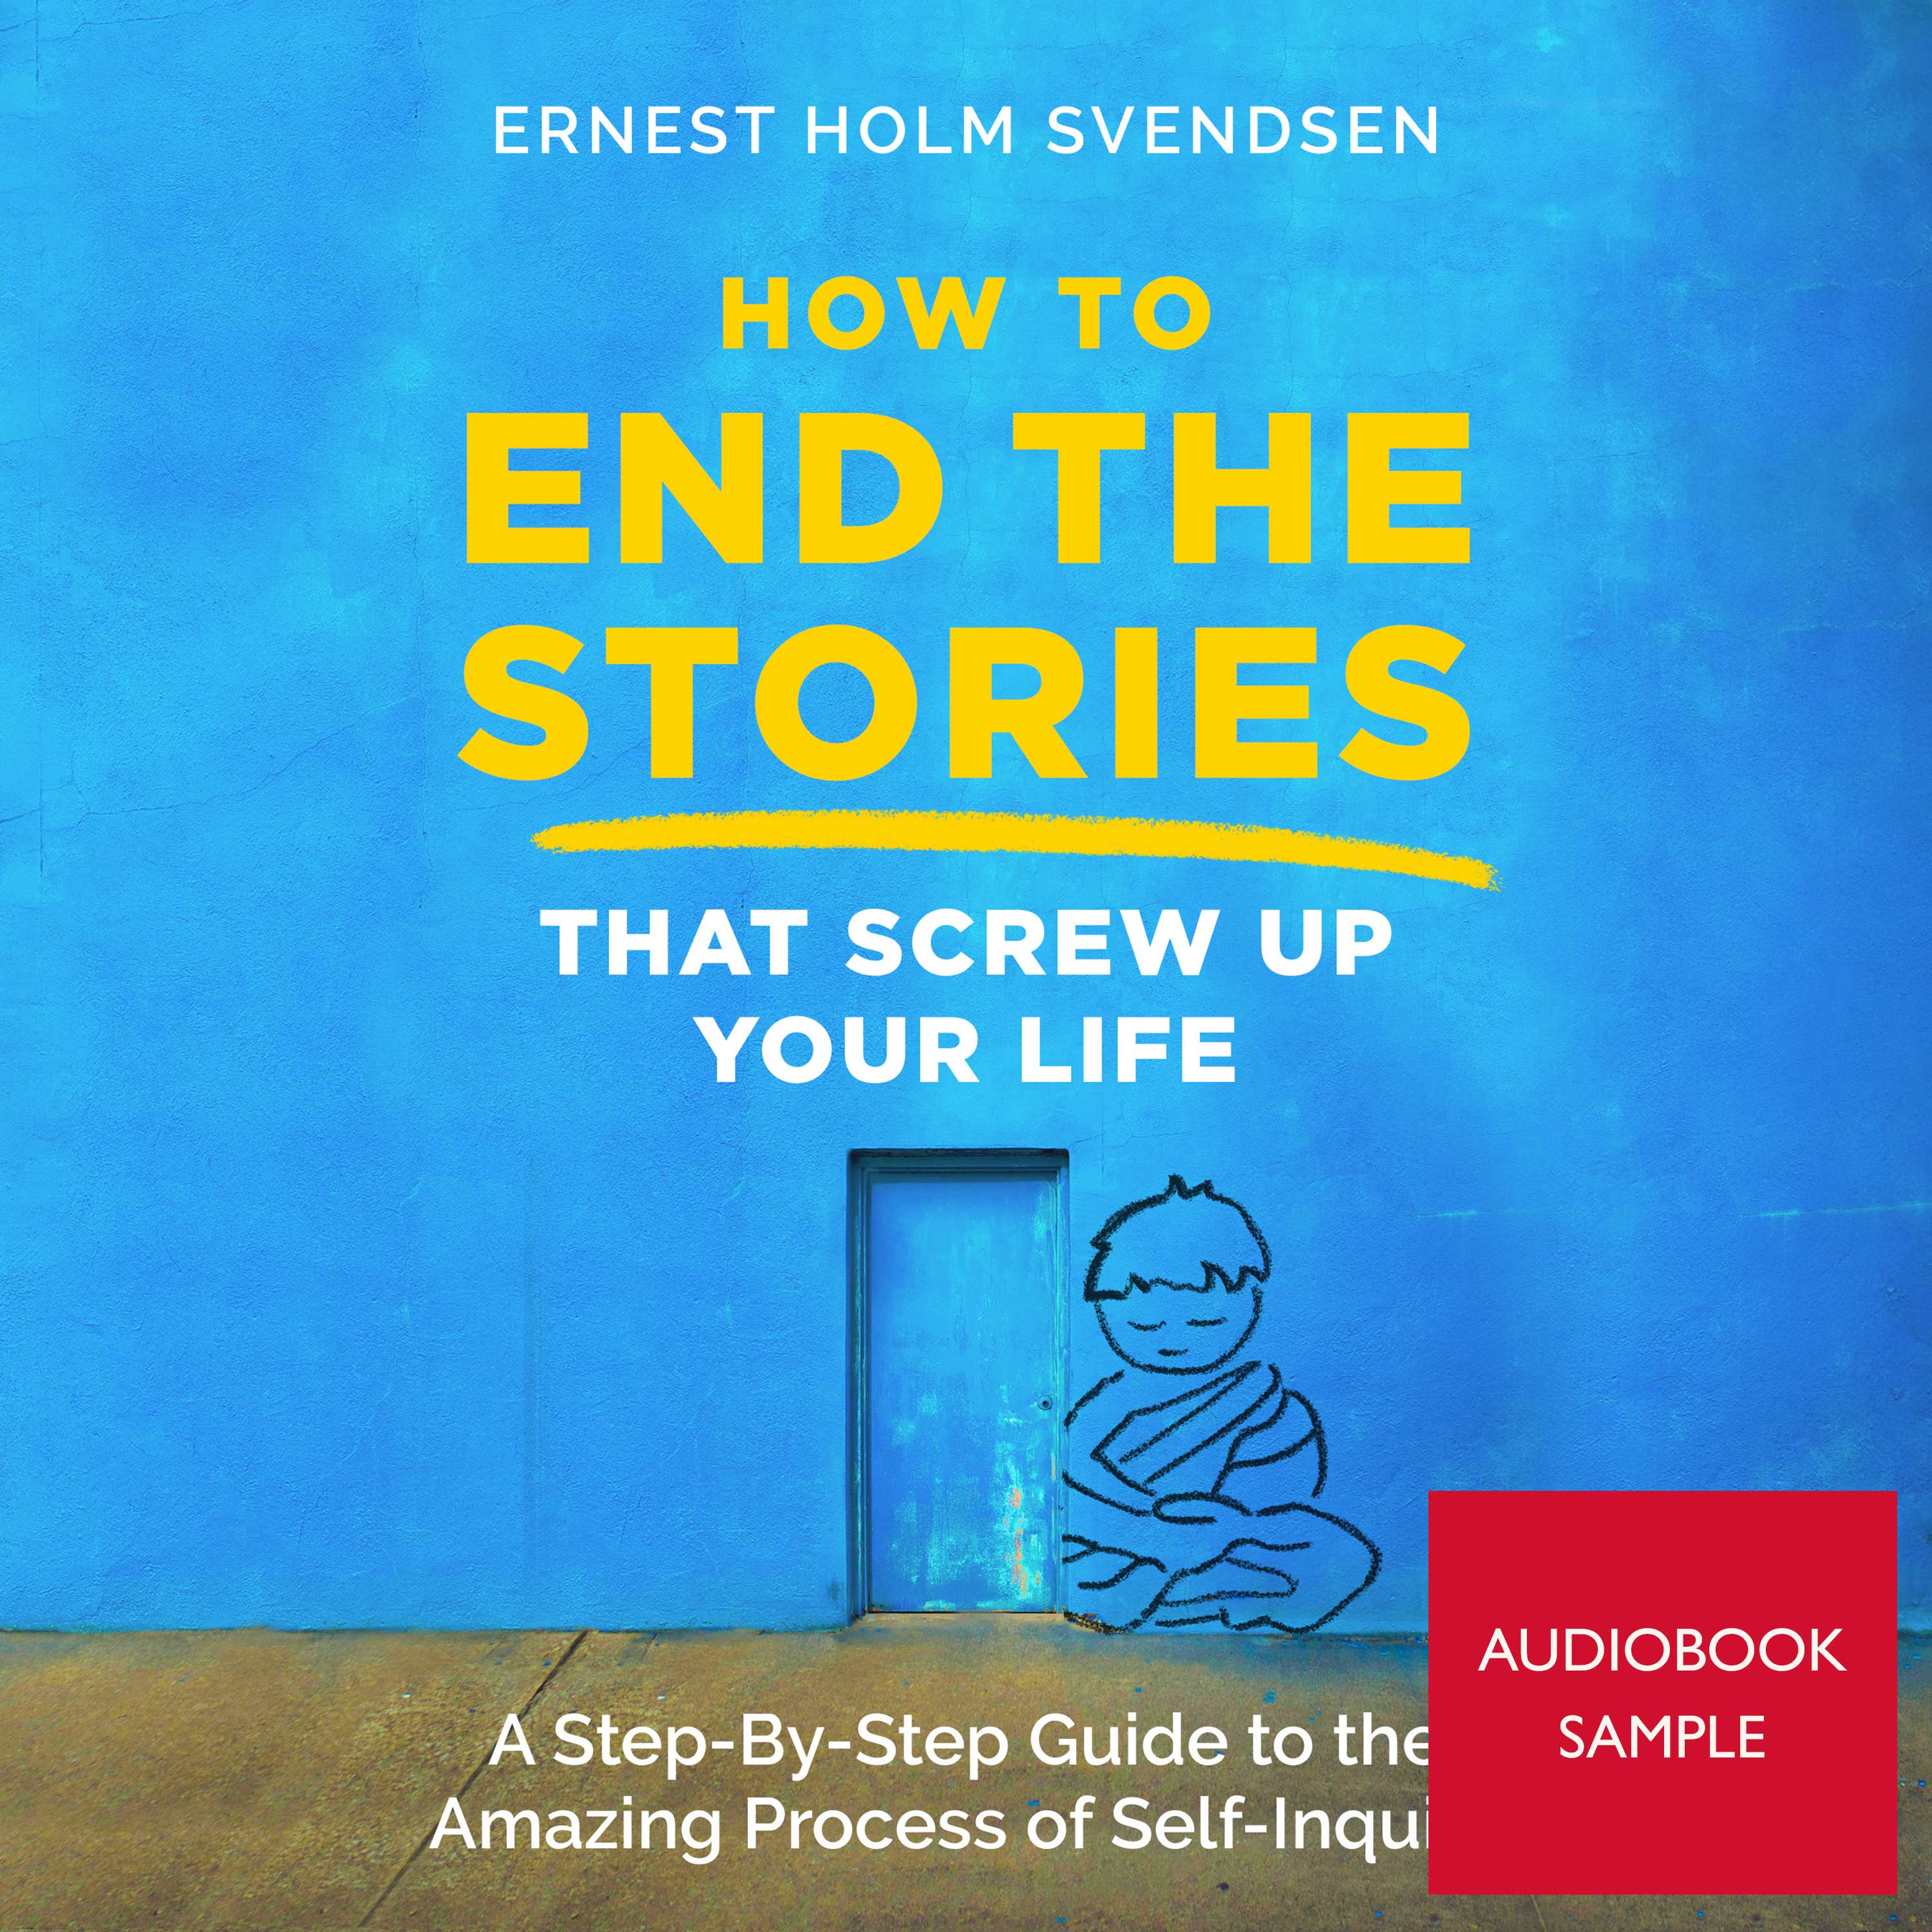 13. How to End the Stories that Screw Up Your Life [Audiobook Sample]